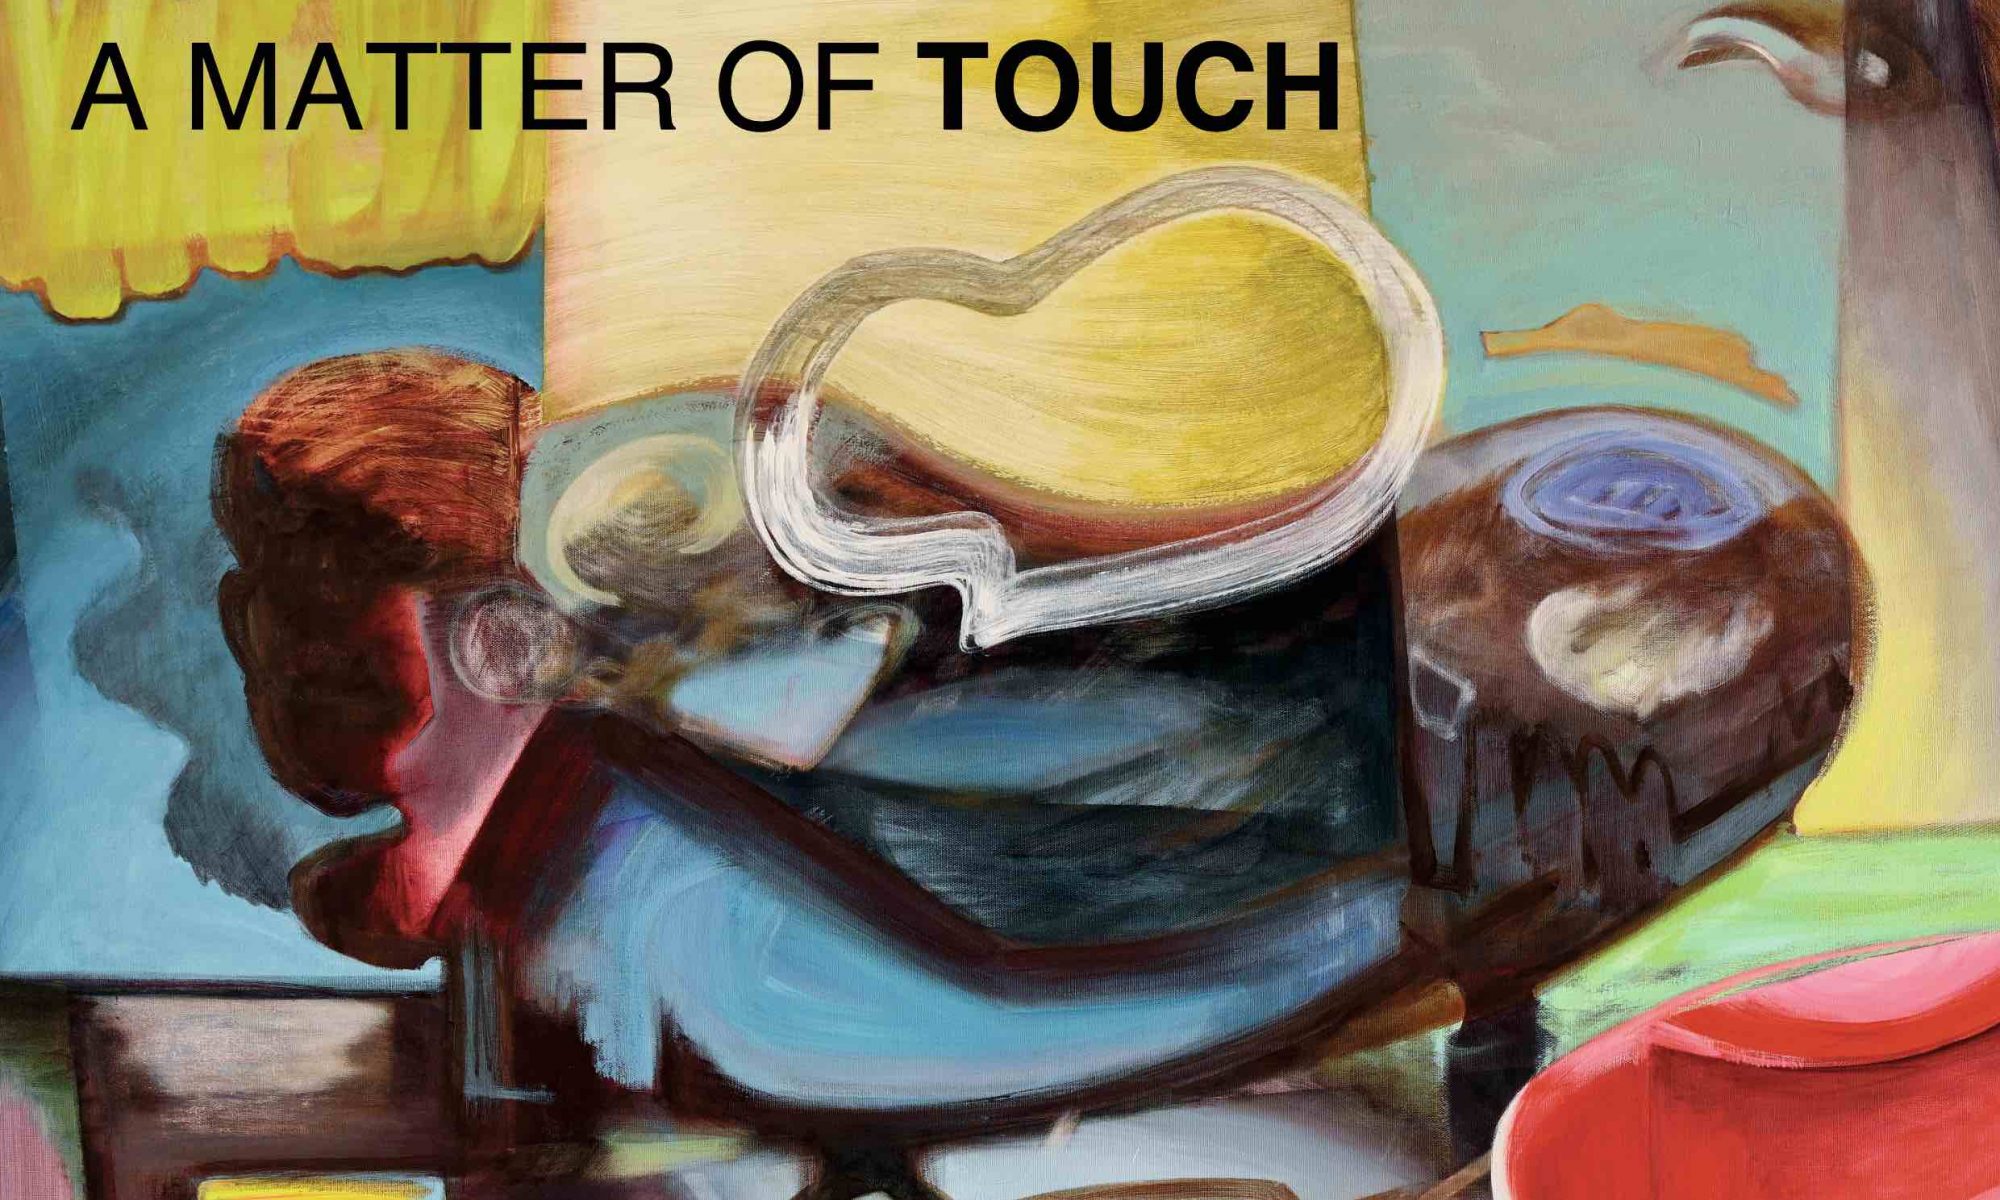 Exhibition A Matter of Touch, invitation card